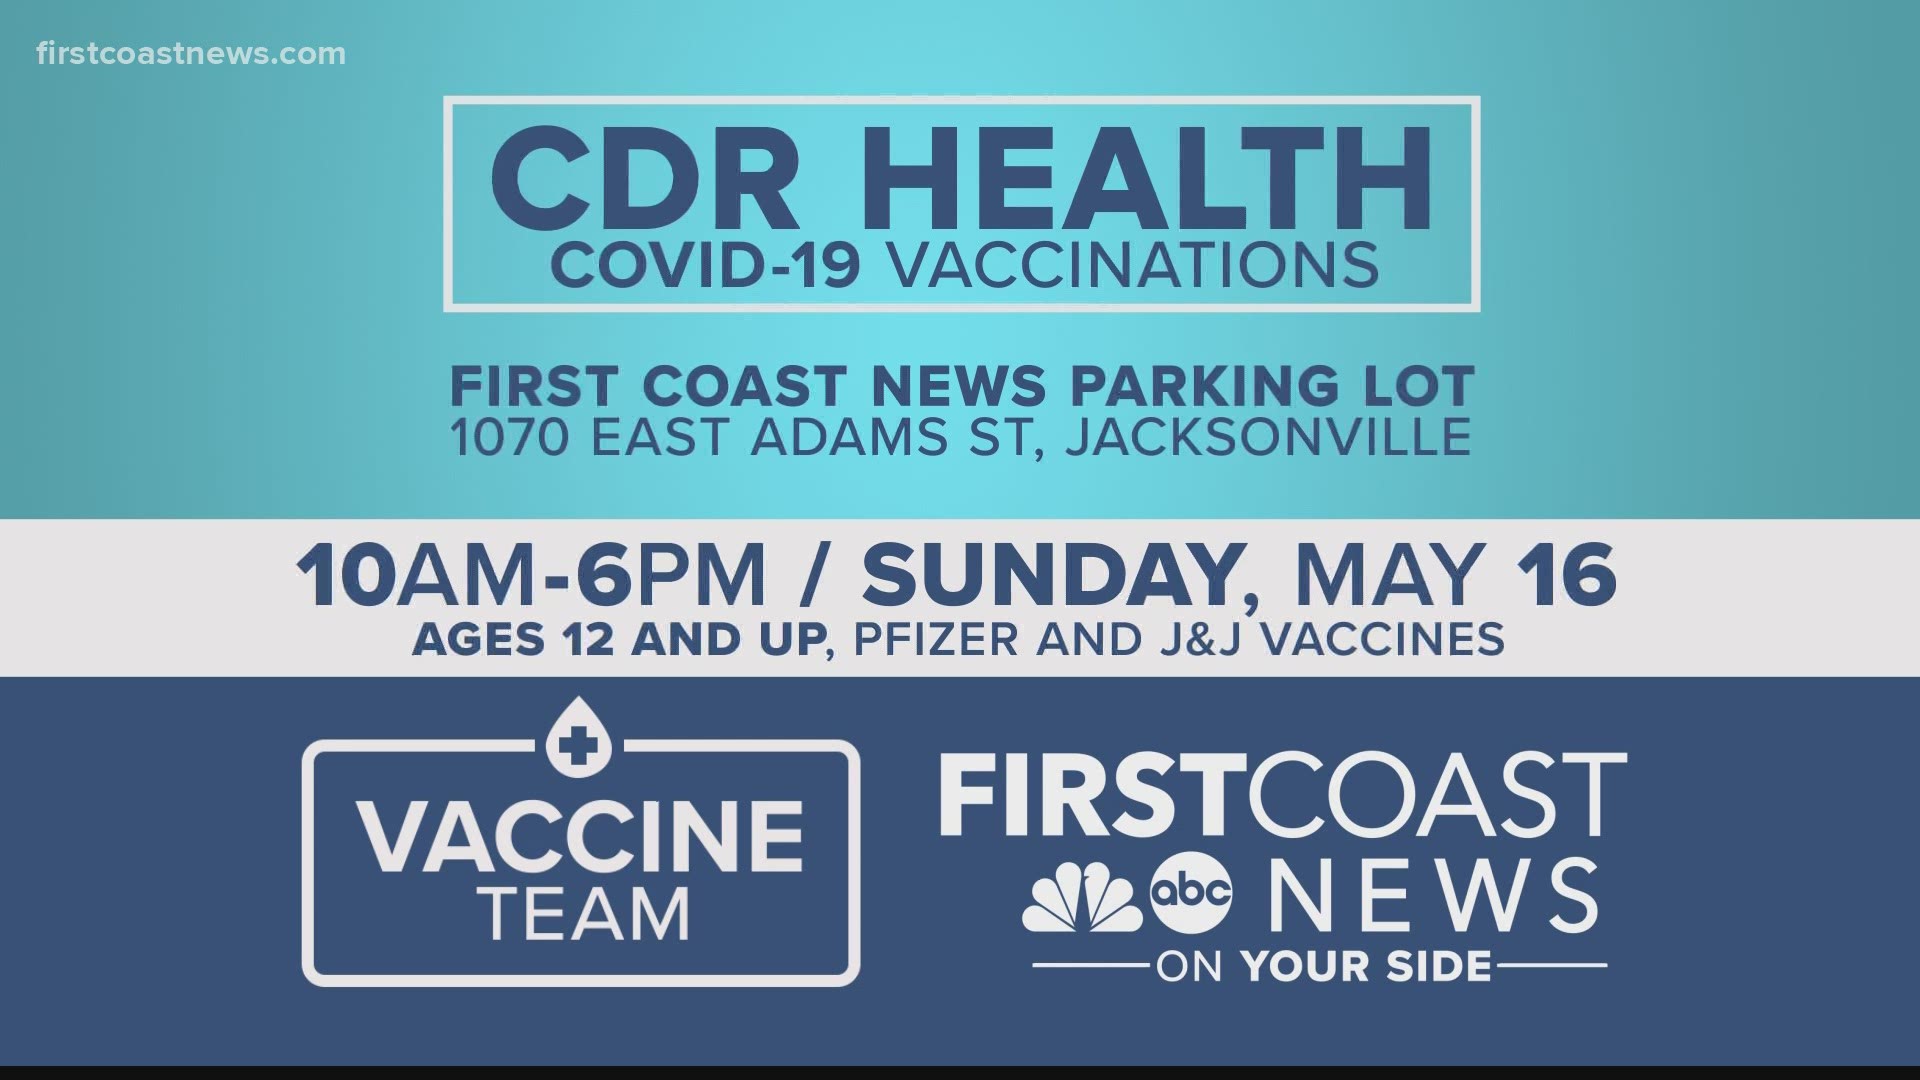 COVID-19 mobile vaccination site coming to First Coast News this weekend